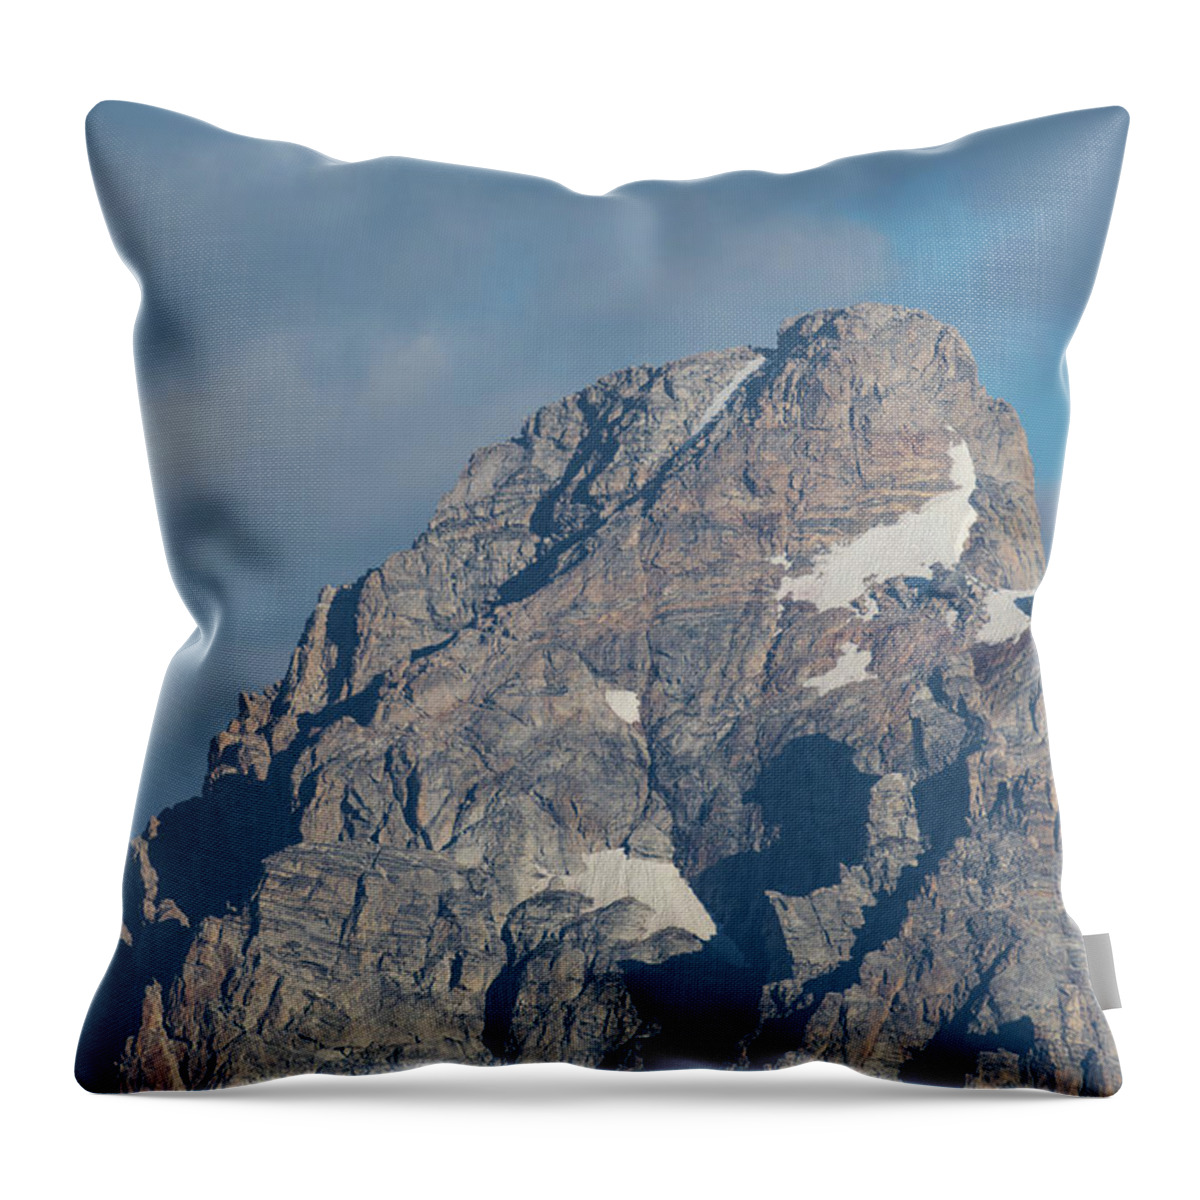 Wyoming Throw Pillow featuring the photograph Grand Teton Summit by Alan Vance Ley